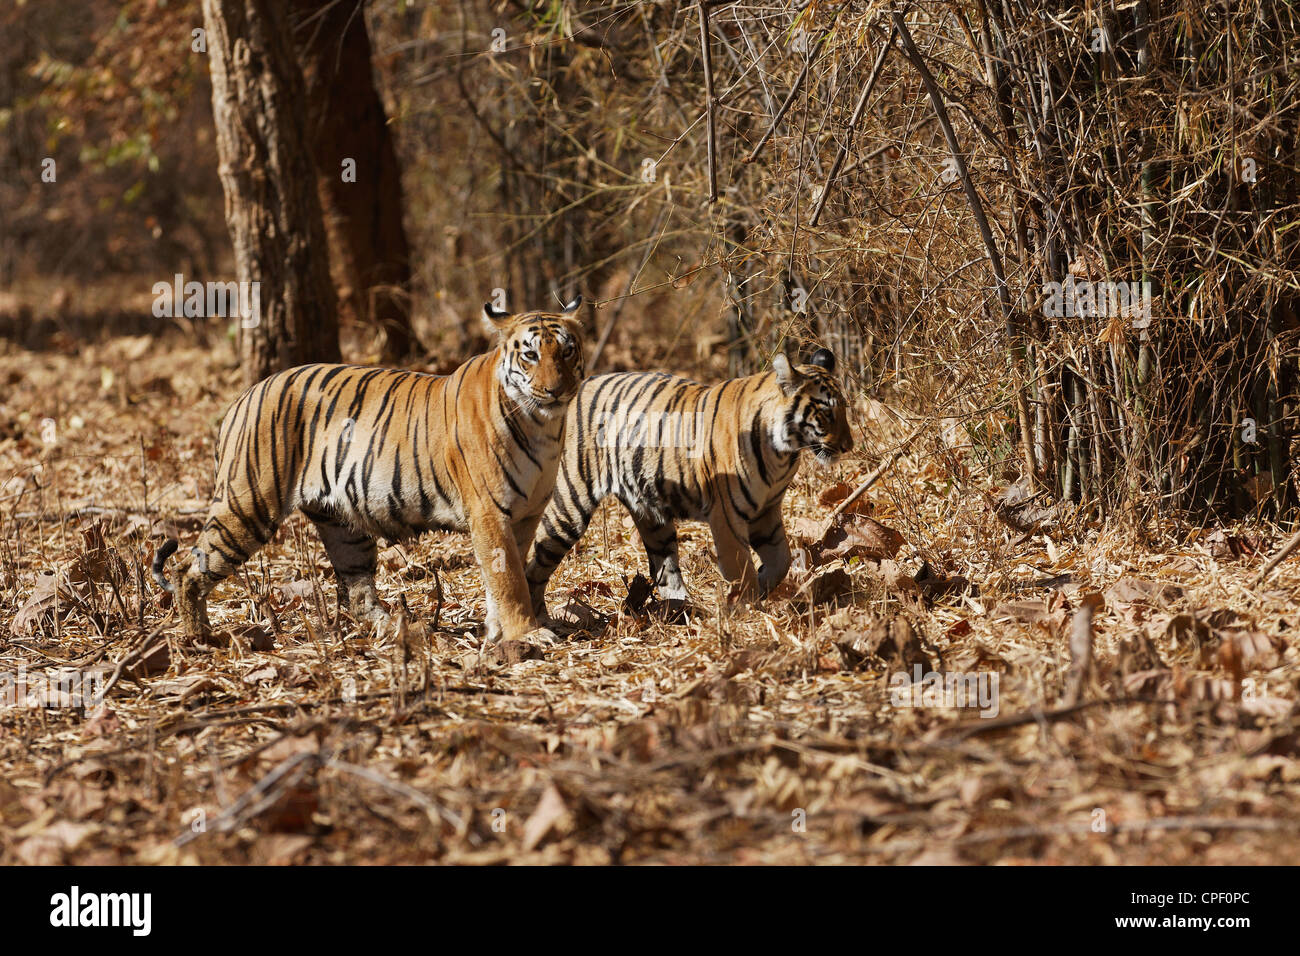 Pandharponi Tigress And Her Cub In The Forest Of Tadoba India Stock Photo Alamy